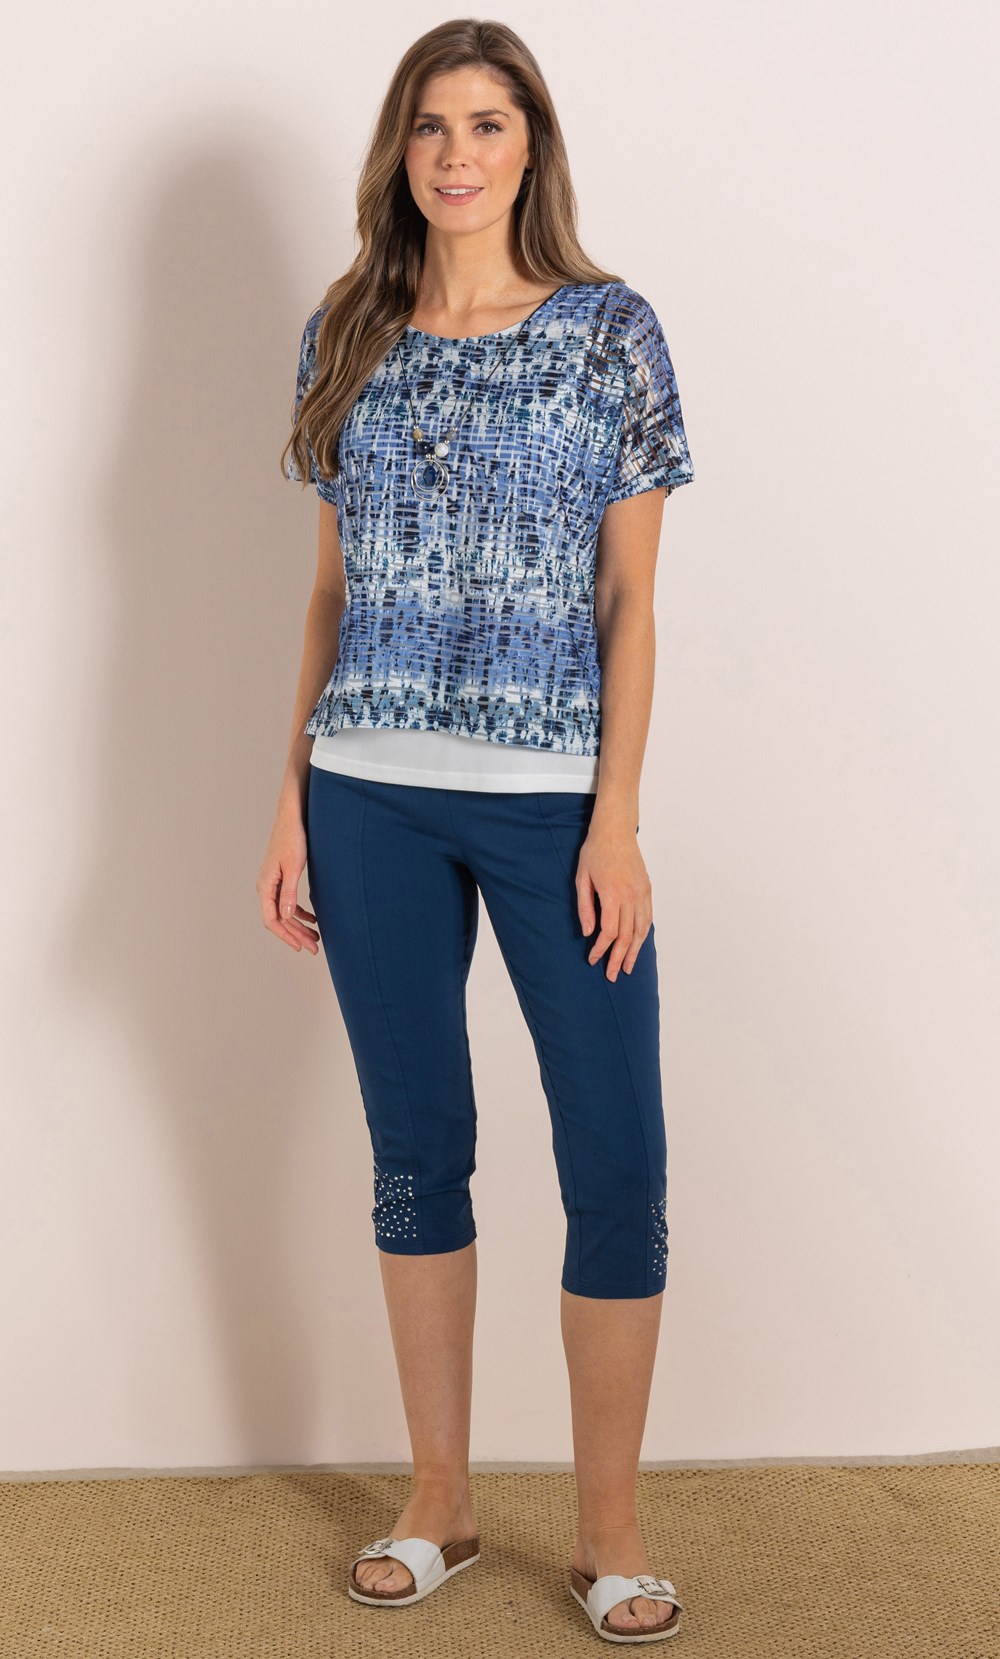 Layered Printed Top With Necklace